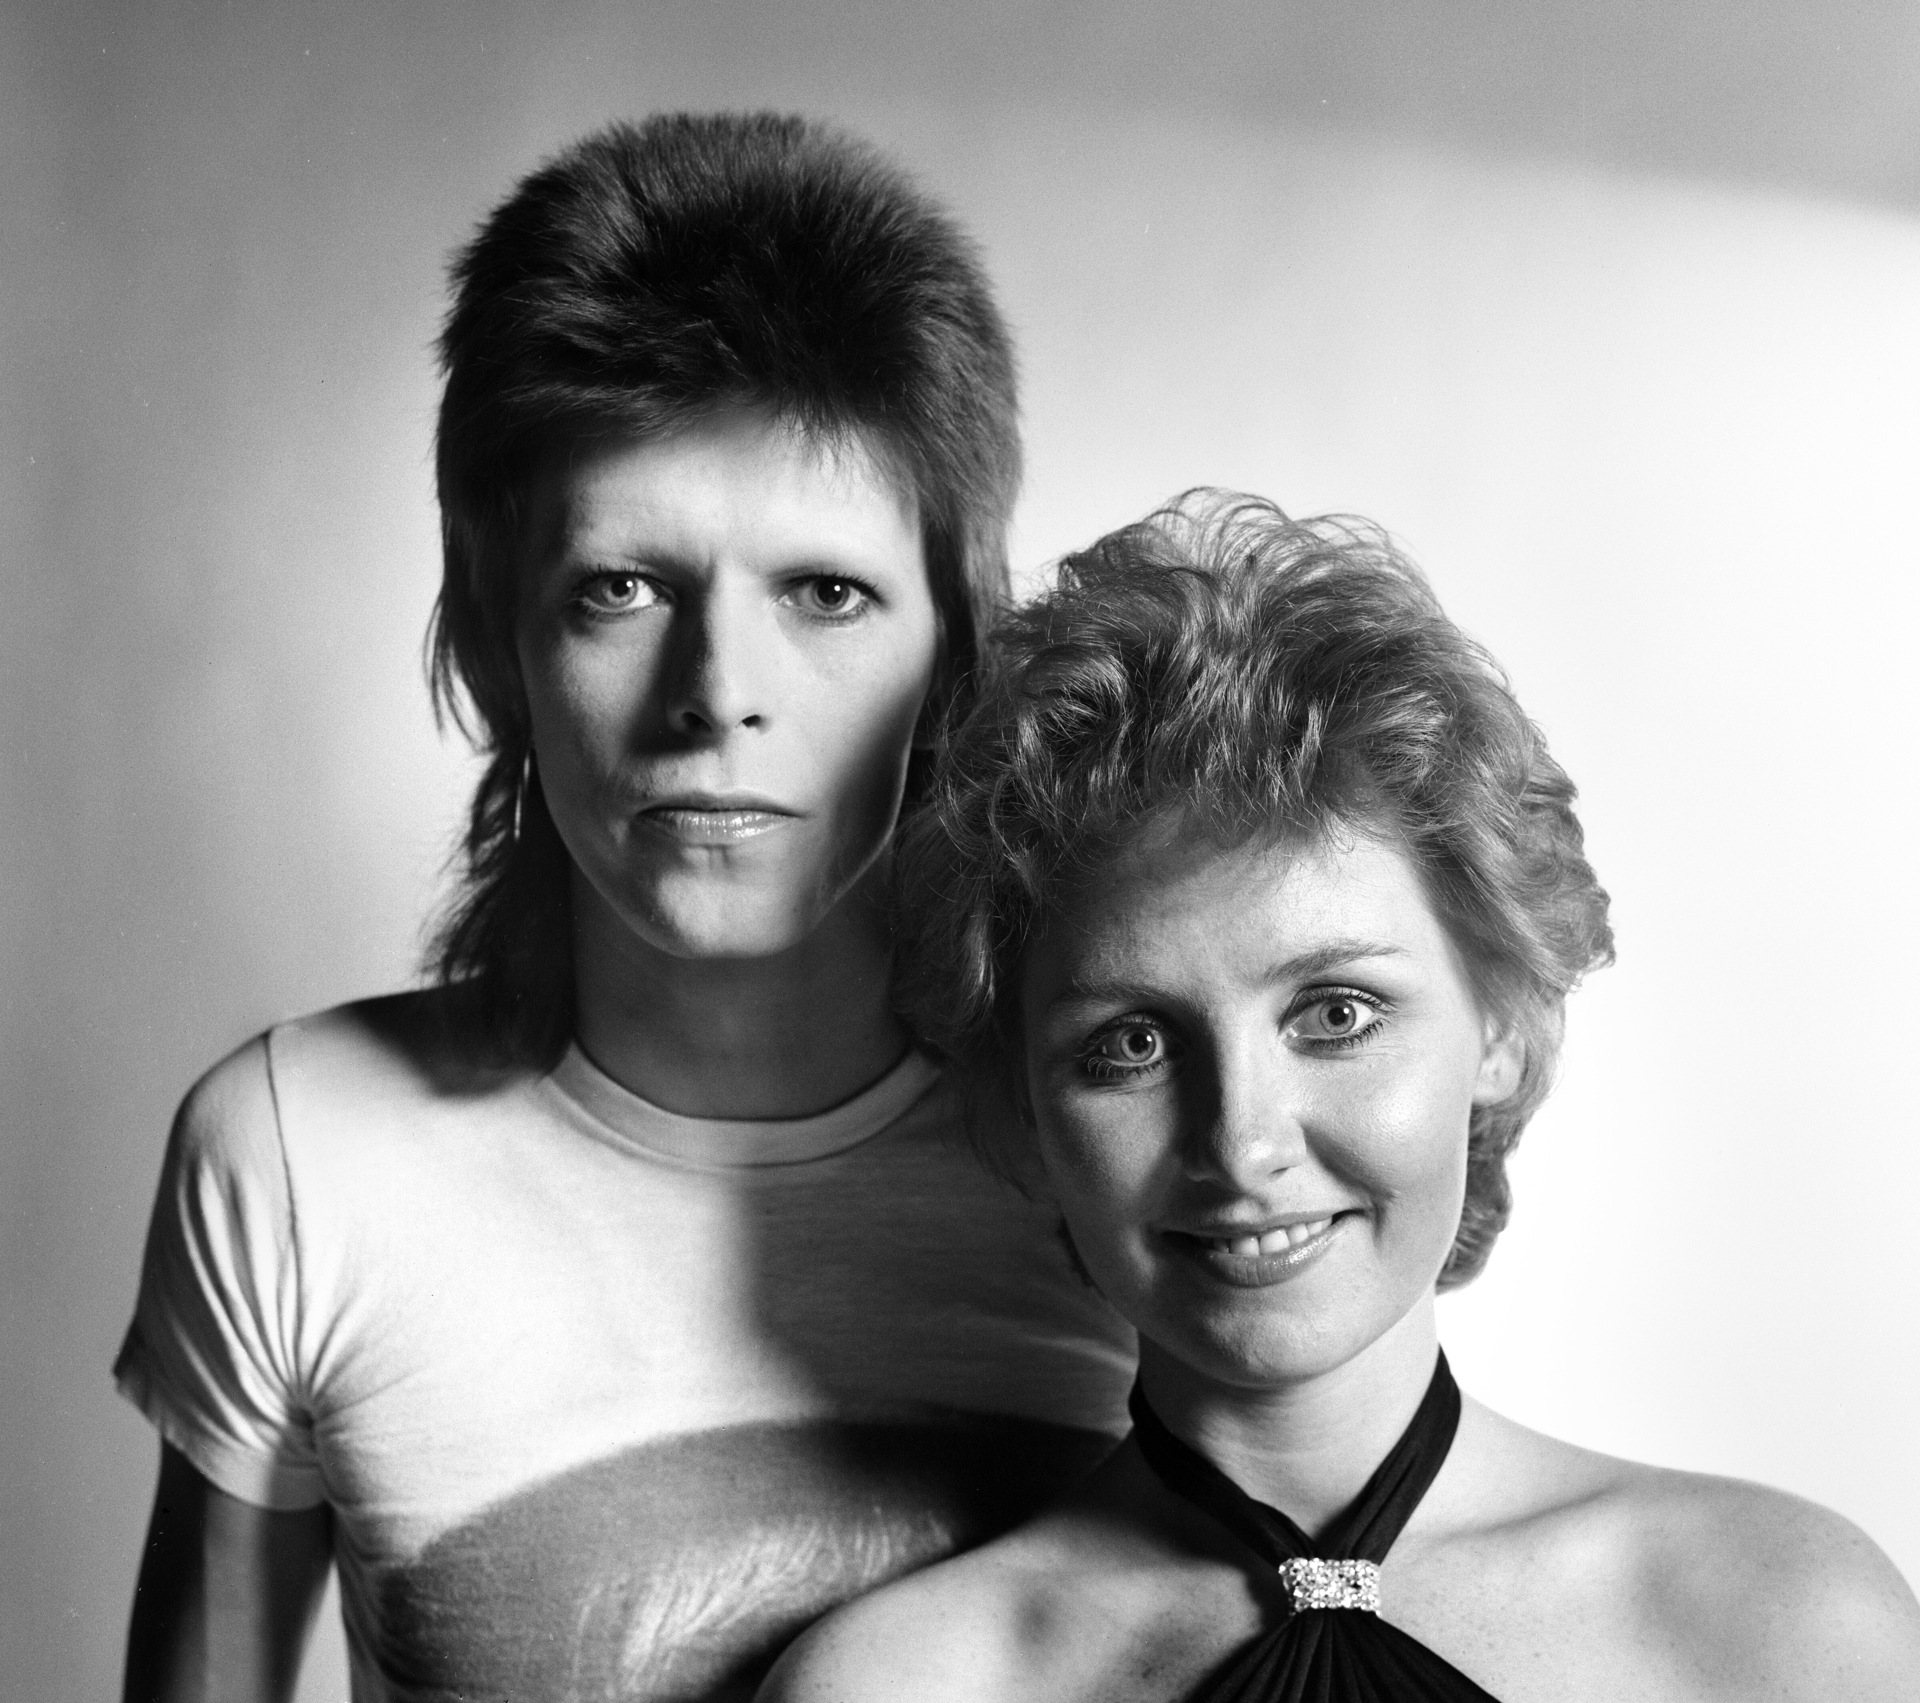 British pop singer David Bowie poses with Lulu in the Daily Mirror studio, 27th December 1973. (Photo by Kent Gavin/Mirrorpix/Getty Images)